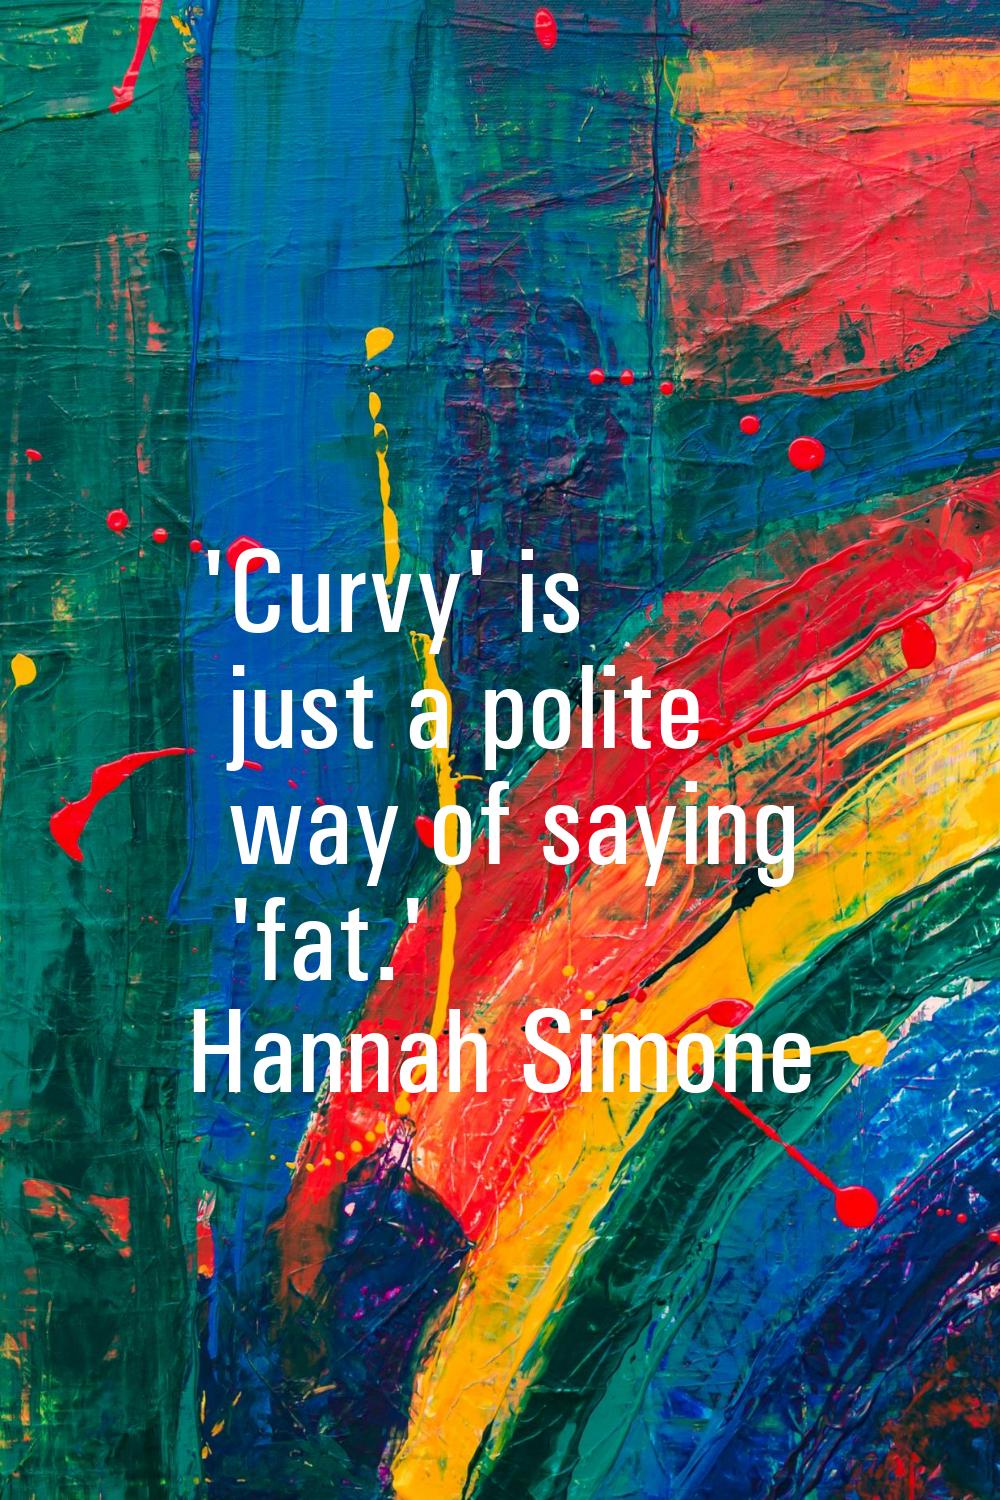 'Curvy' is just a polite way of saying 'fat.'